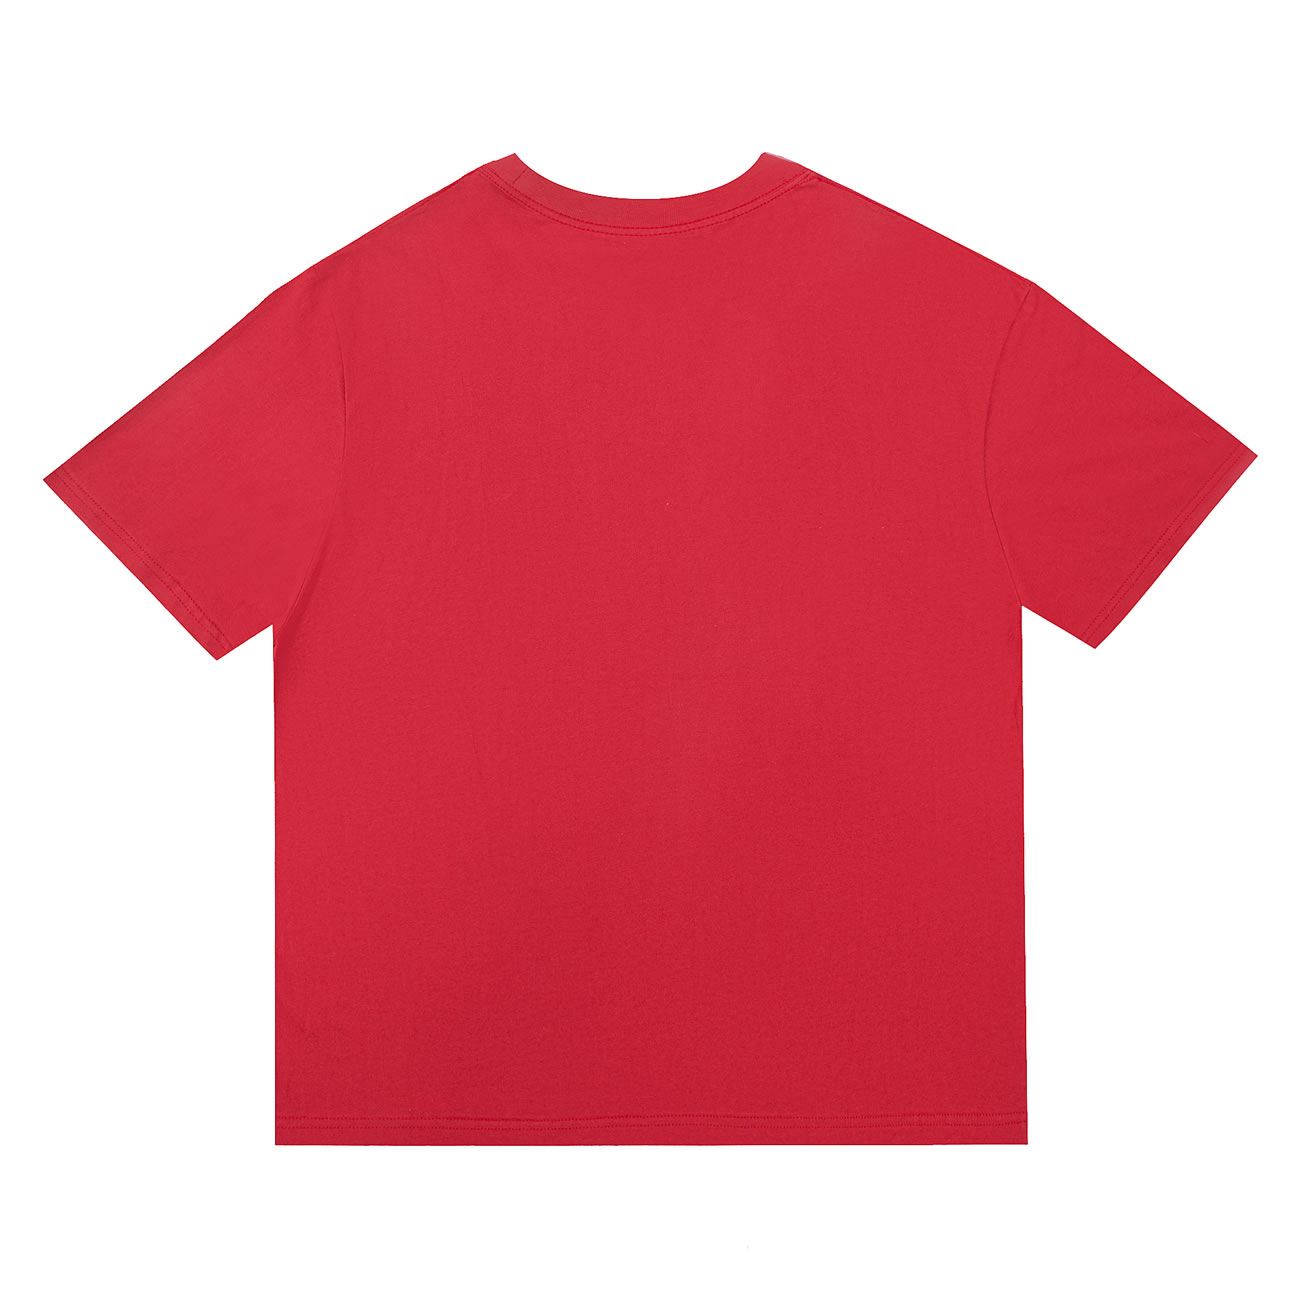 Kanye New T Shirts For Sale Red (2) - newkick.org